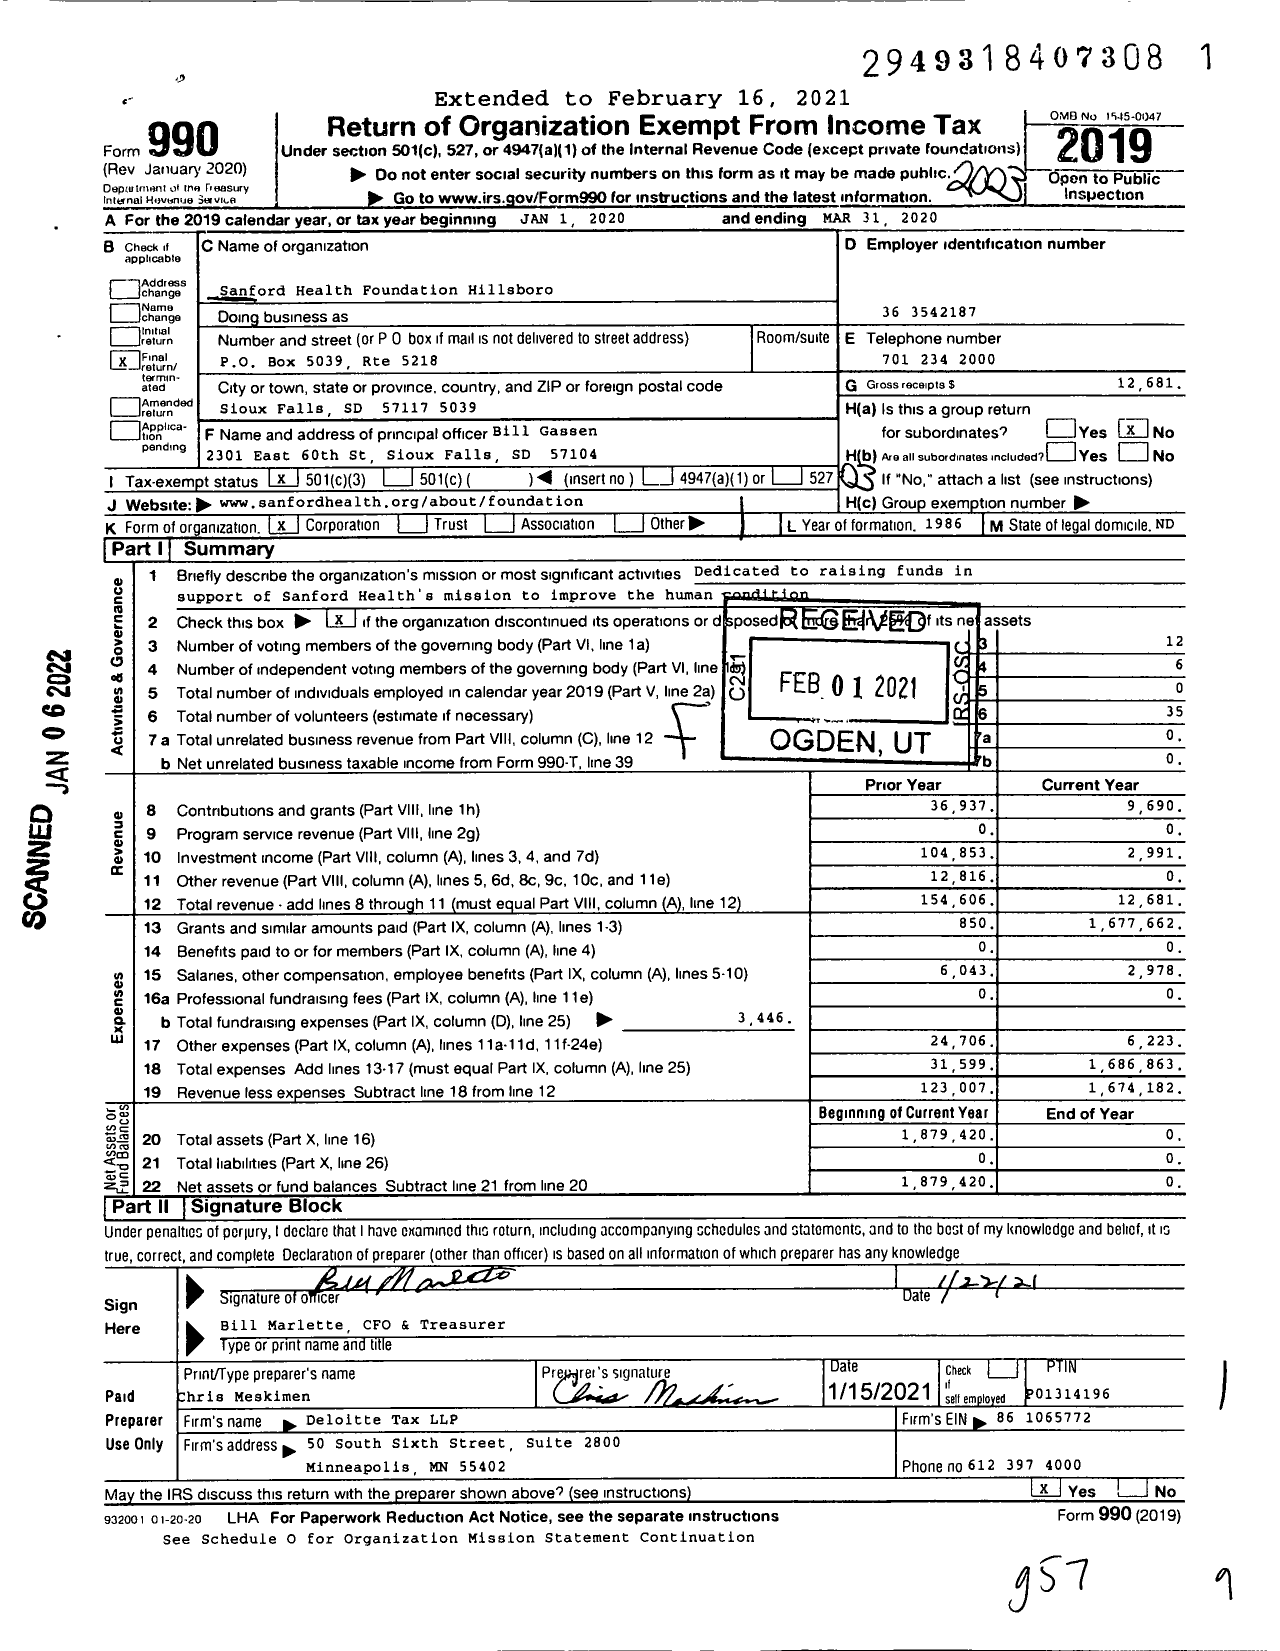 Image of first page of 2019 Form 990 for Sanford Health Foundation Hillsboro